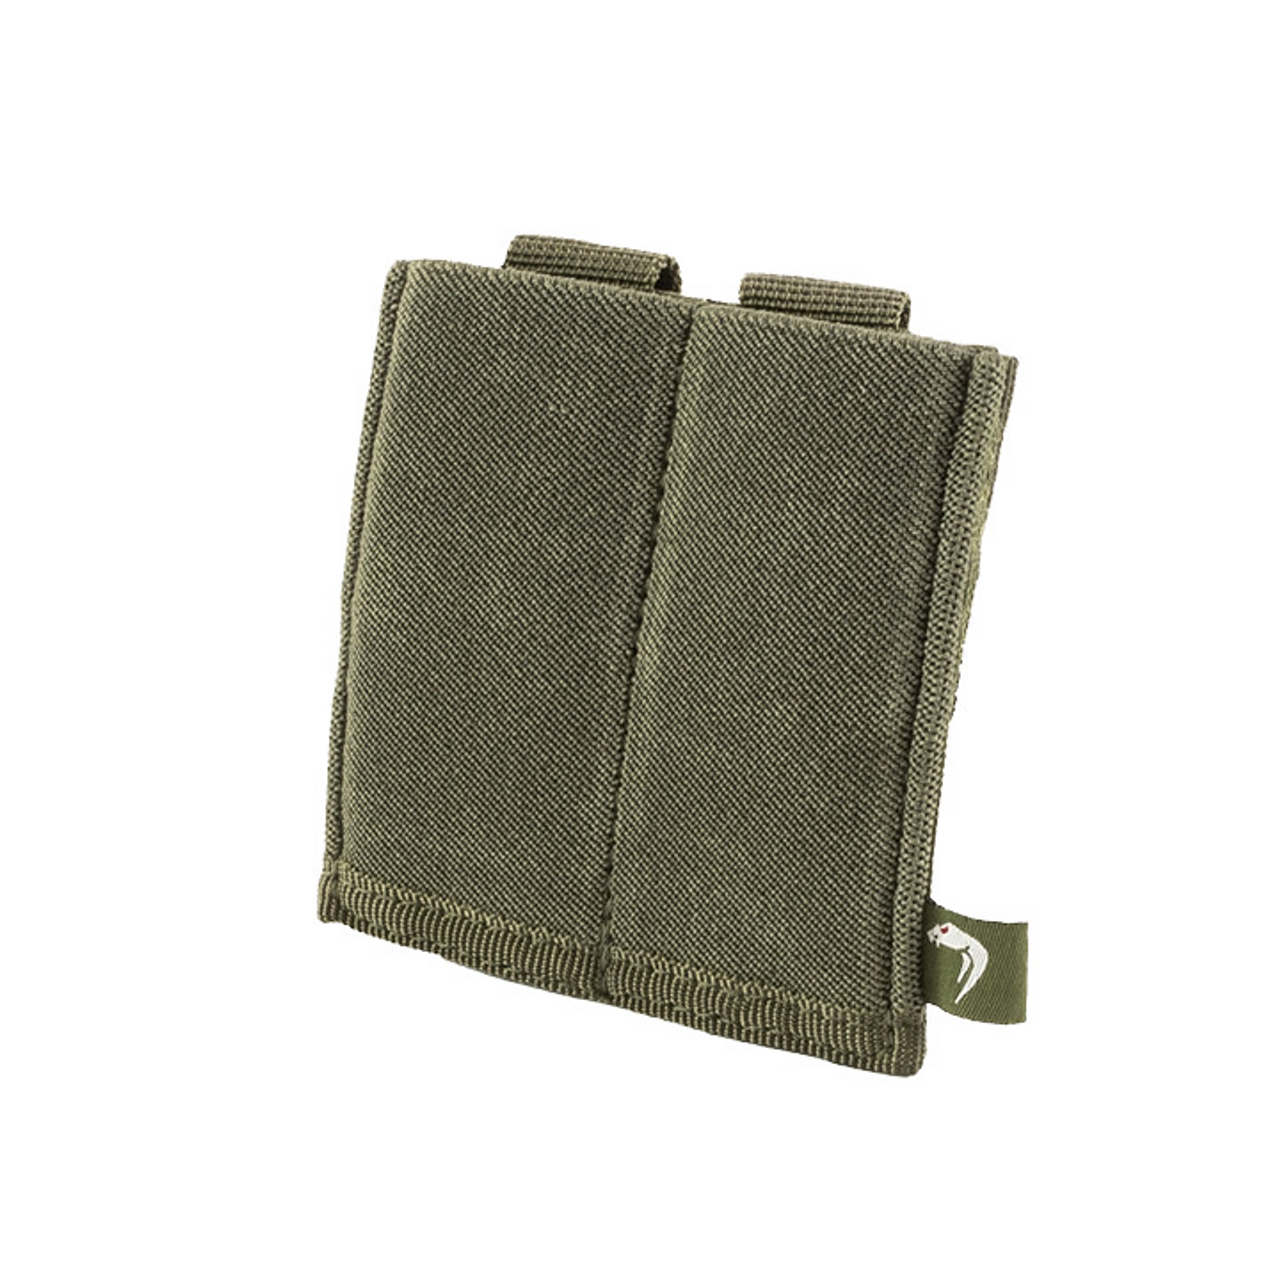 Viper Double Pistol Mag Plate - Green